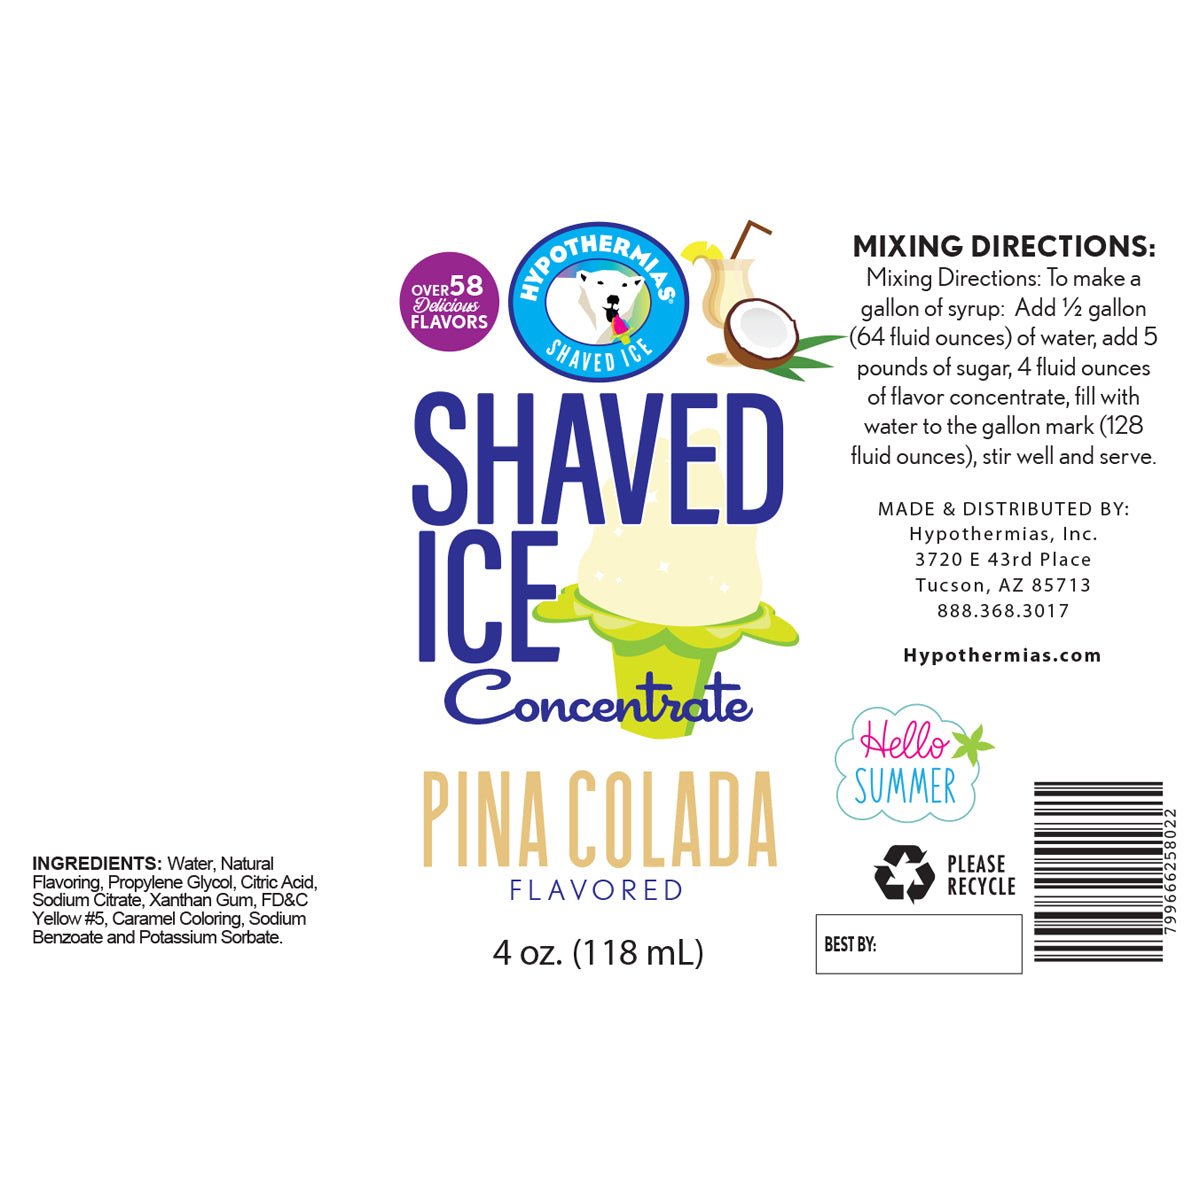 Hypothermias pina colada shaved ice or snow cone syrup ingredient label.